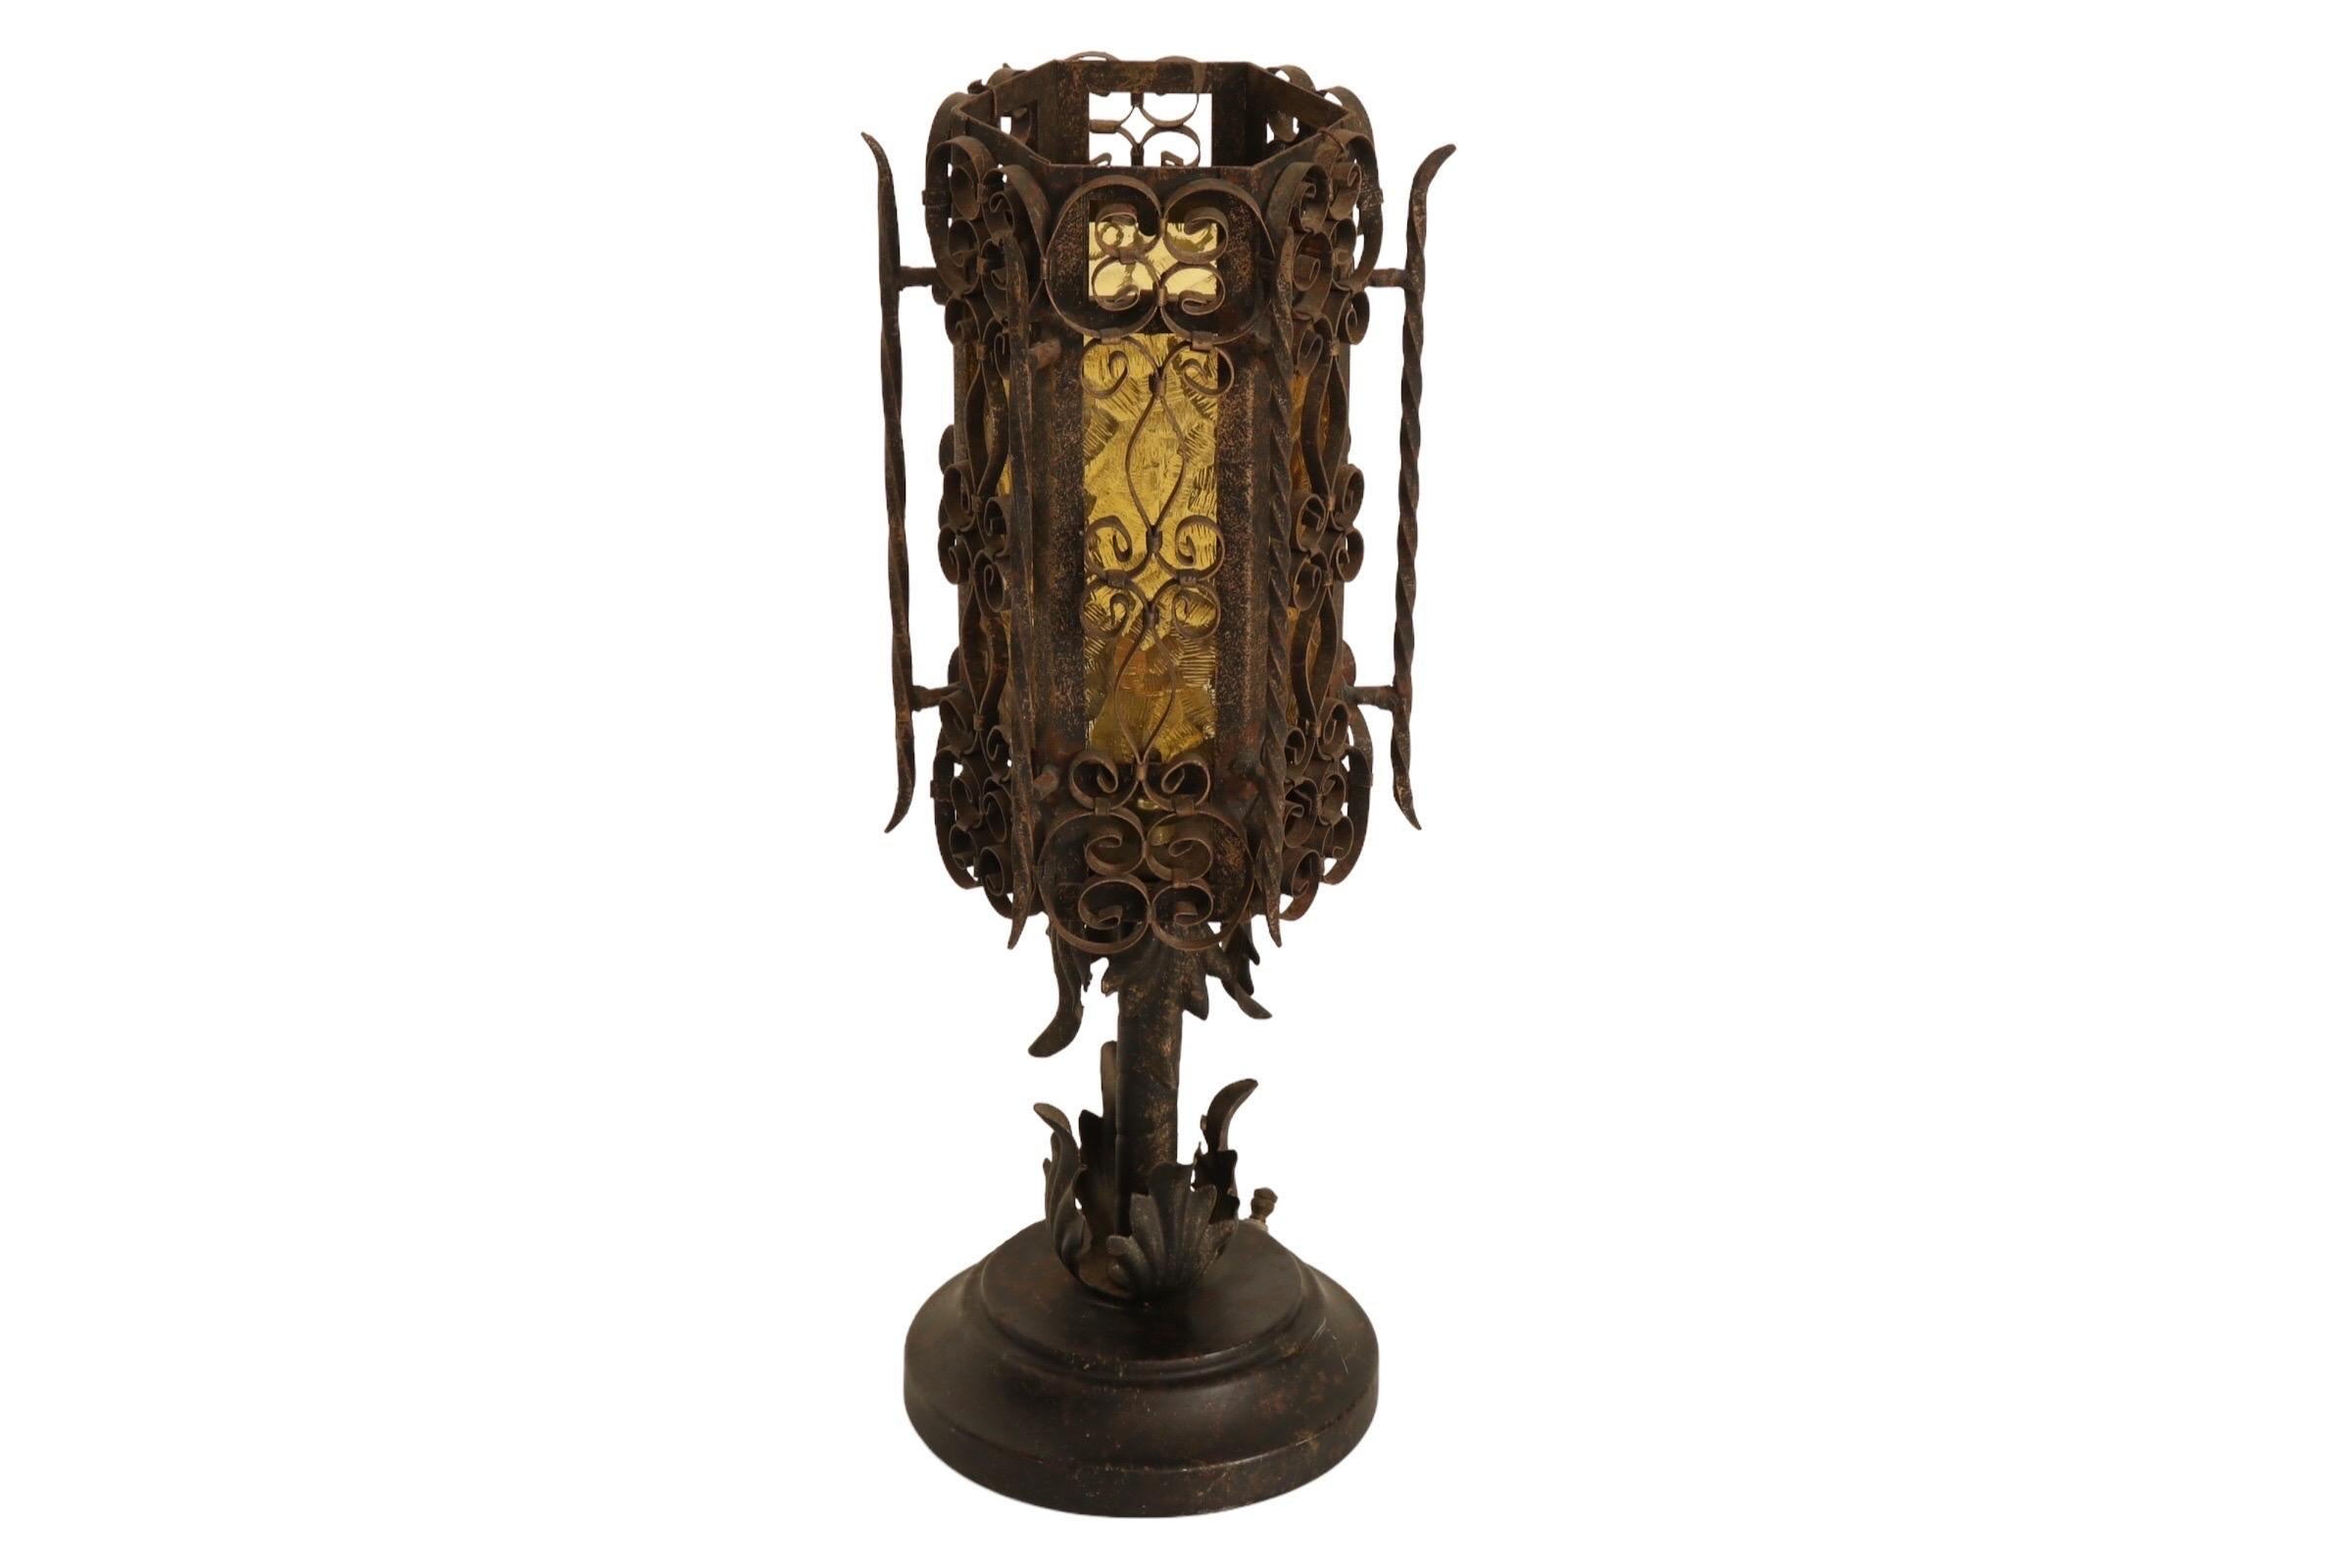 A Gothic lantern style hexagonal table lamp. Textured amber glass panes on each side sit behind scrolled elements and twisted wrought iron posts decorate the corners of the frame. The lamp is supported by a single iron column with four acanthus